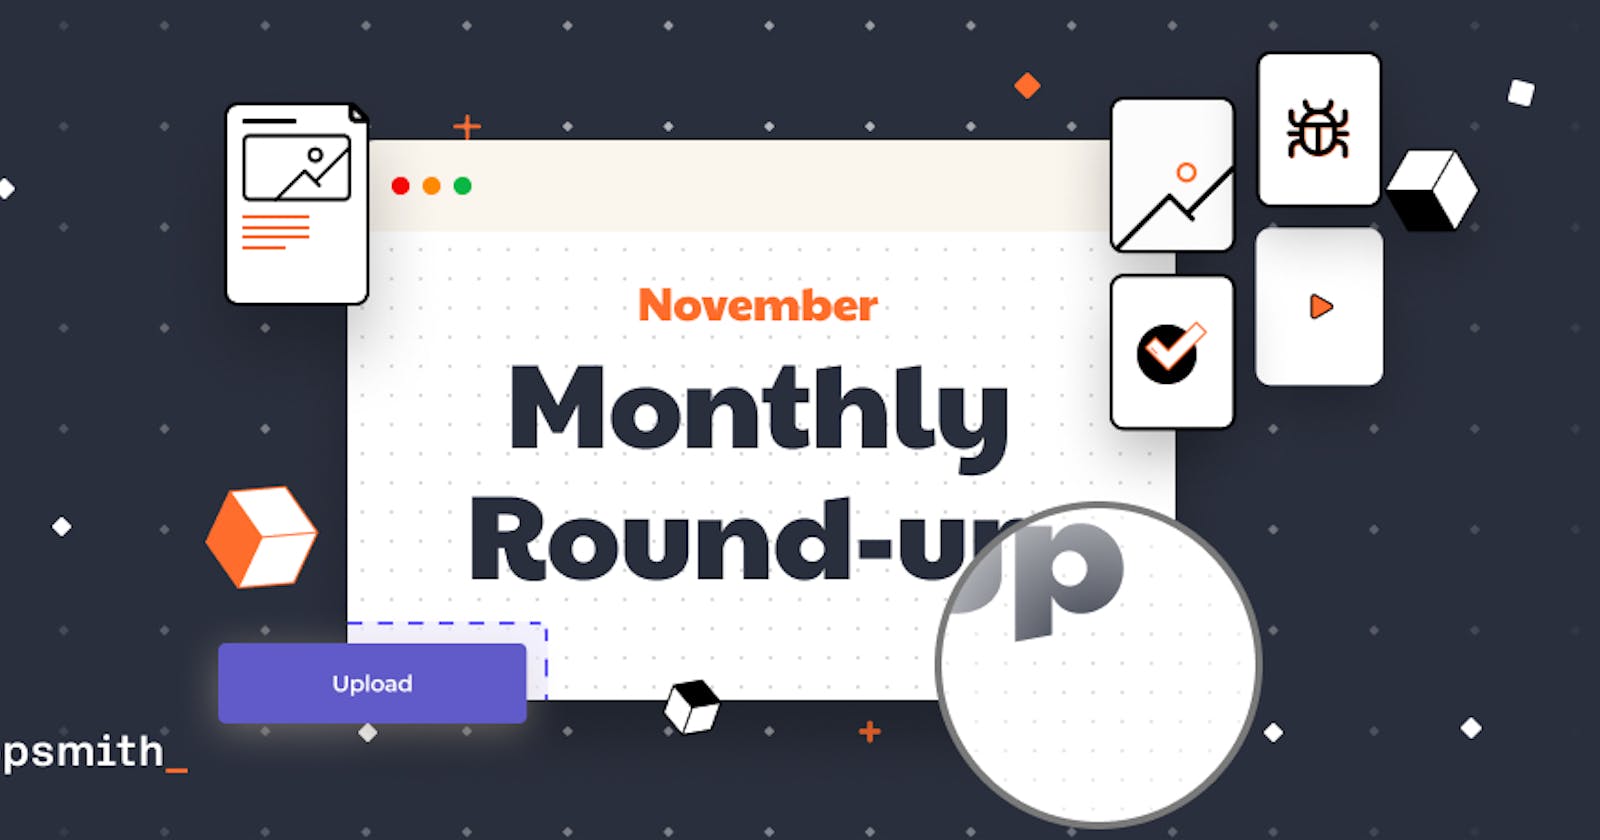 November Round-up: New JS Editor, Button-group Widget and More Collabs!